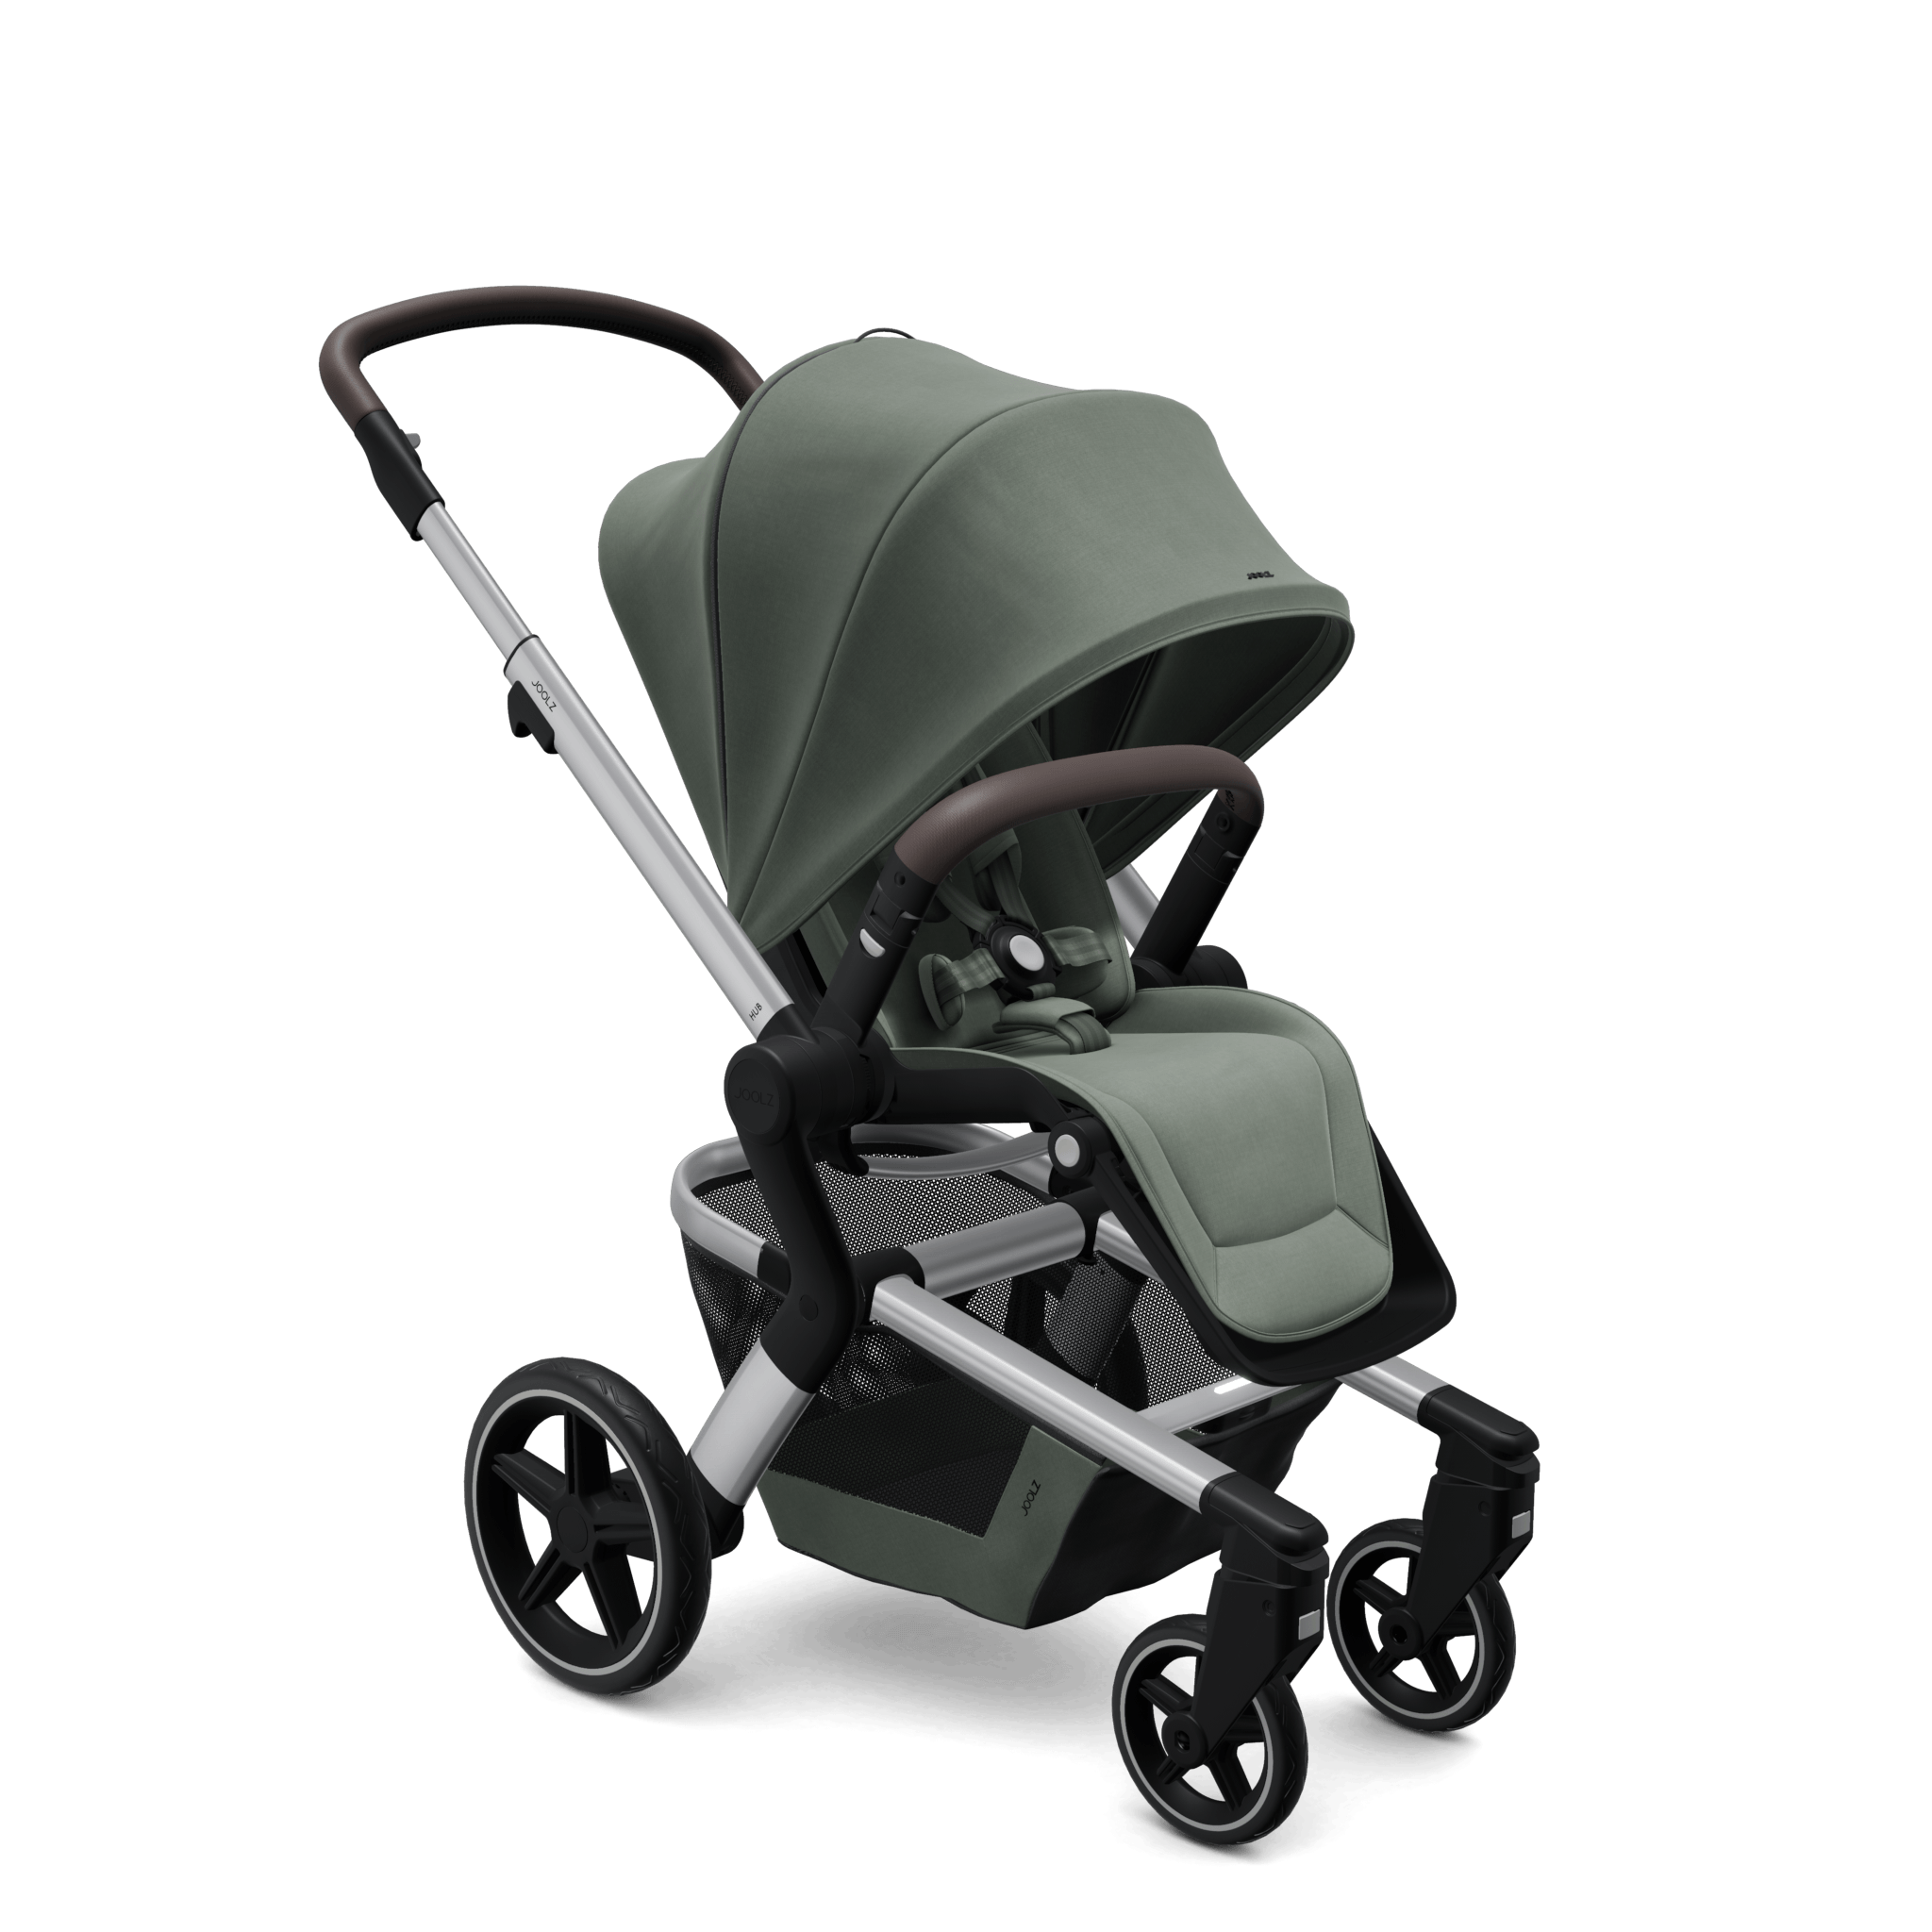 Joolz Hub+ Premium Baby Stroller, Chassis and Seat with Integrated LED Lights and Rain Cover - ANB Baby -$500 - $1000